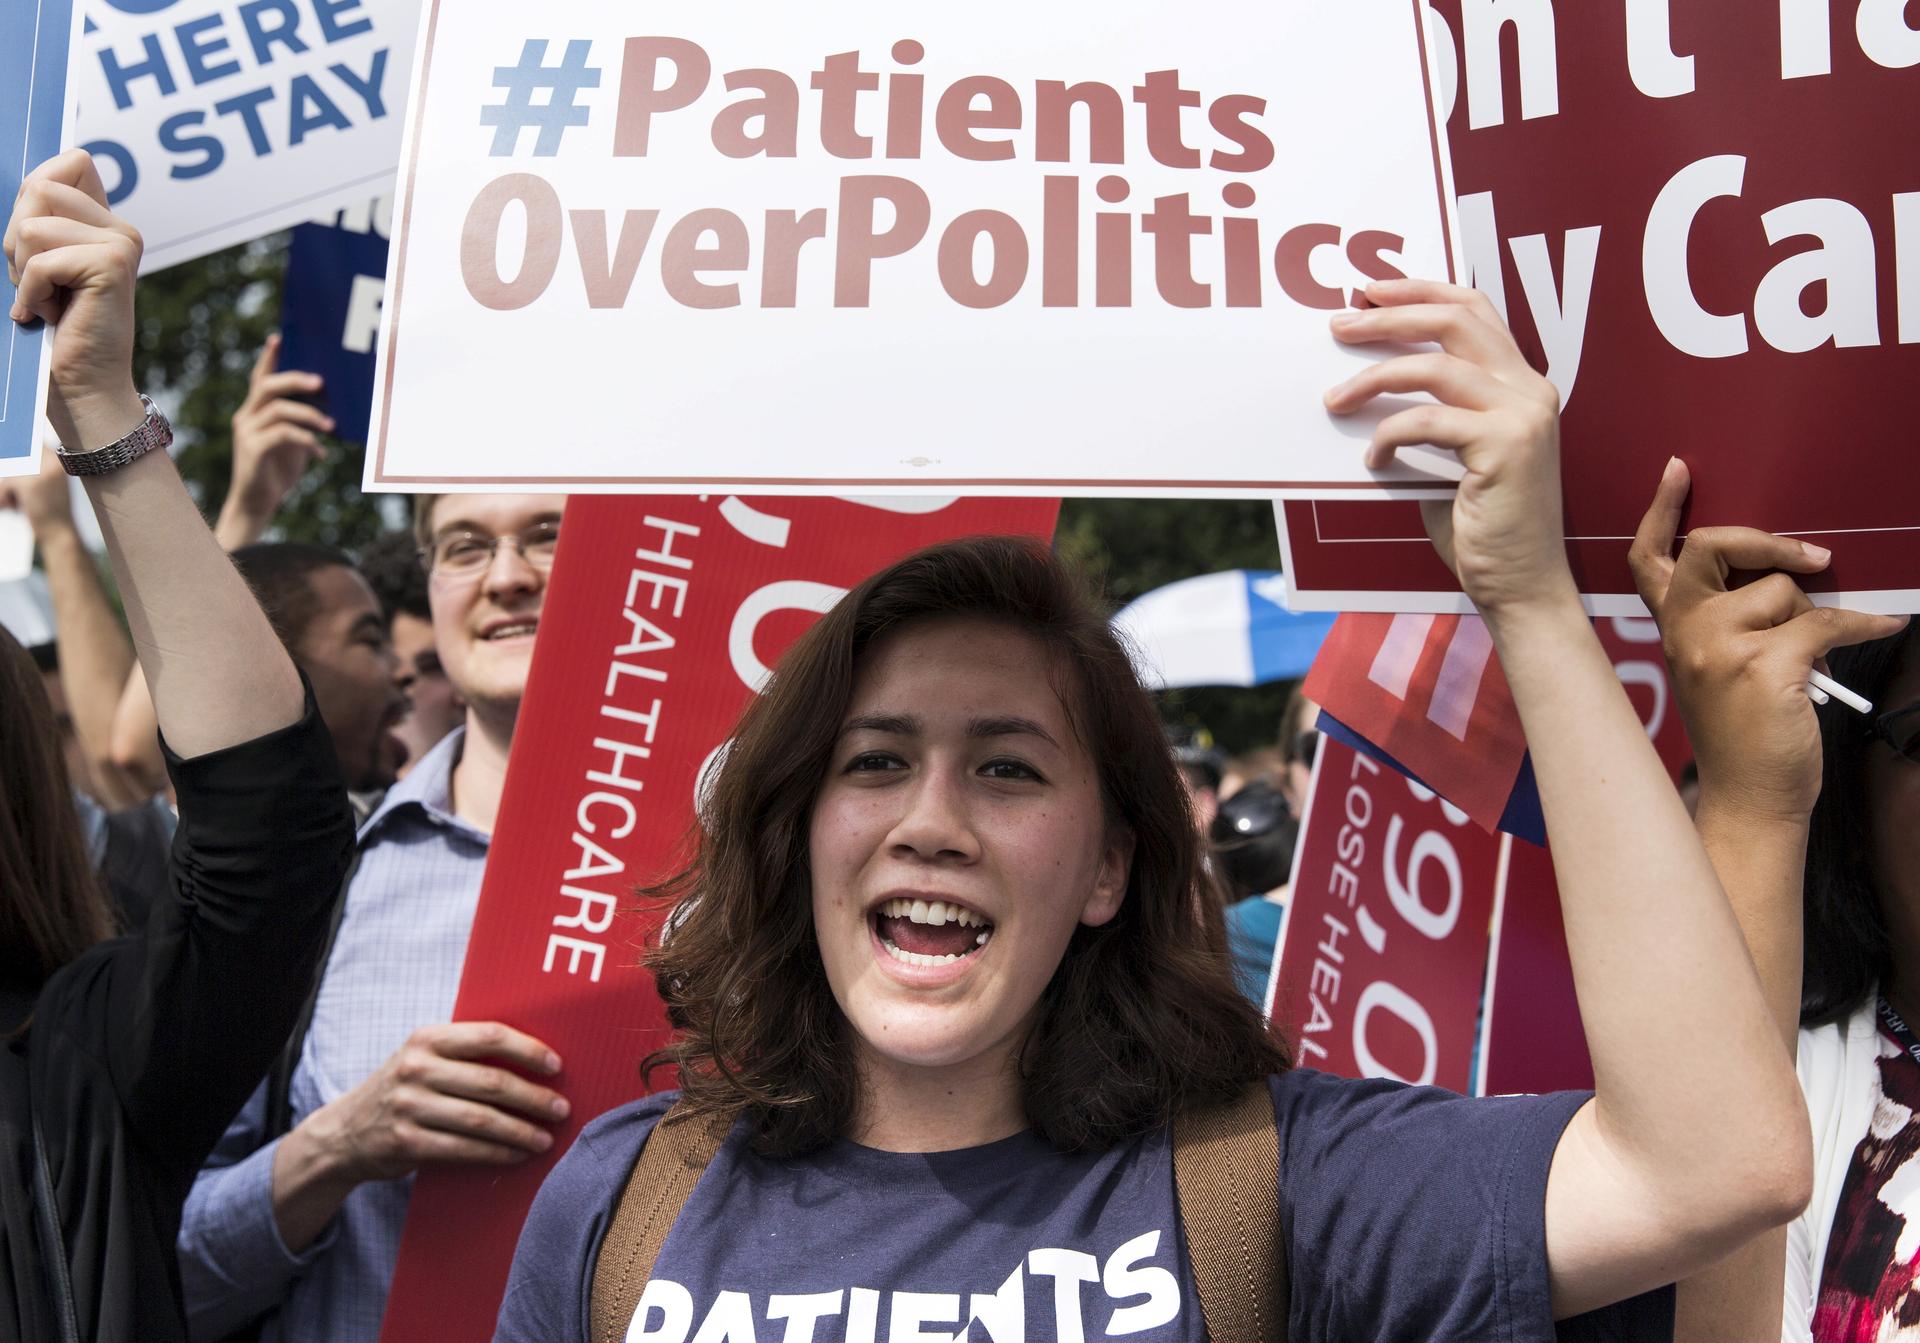 A supporter of the Affordable Care Act celebrates last week after the Supreme Court upheld the law in a 6-3 vote. The Court upheld the nationwide availability of tax subsidies that are crucial to the law's implementation.